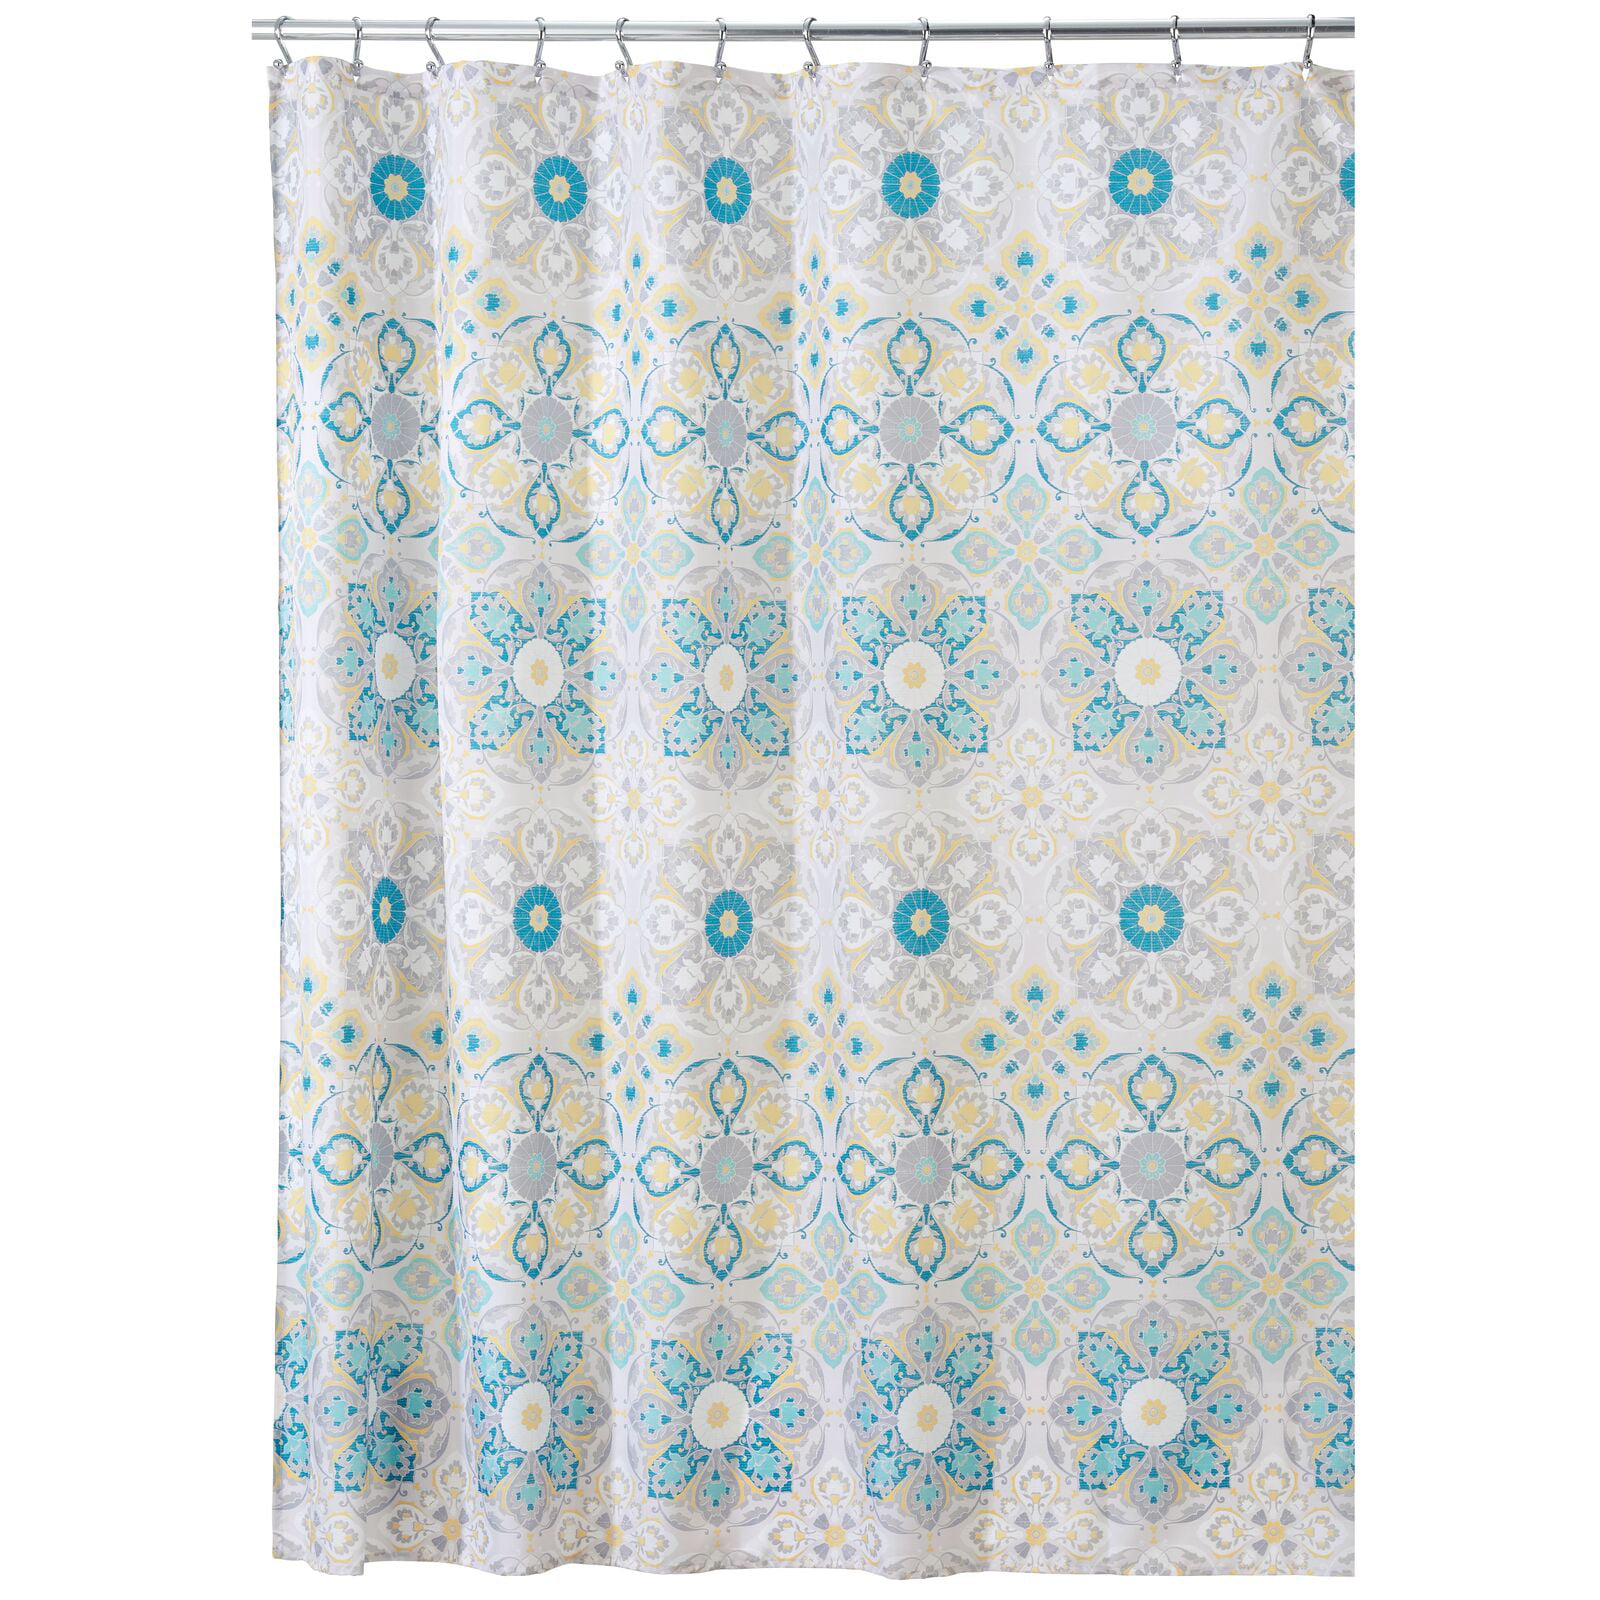 Machine Washable- 72 x 72 mDesign Decorative Leaves Print Easy Care Fabric Shower Curtain with Reinforced Buttonholes Teal Blue/White for Bathroom Showers Stalls and Bathtubs 